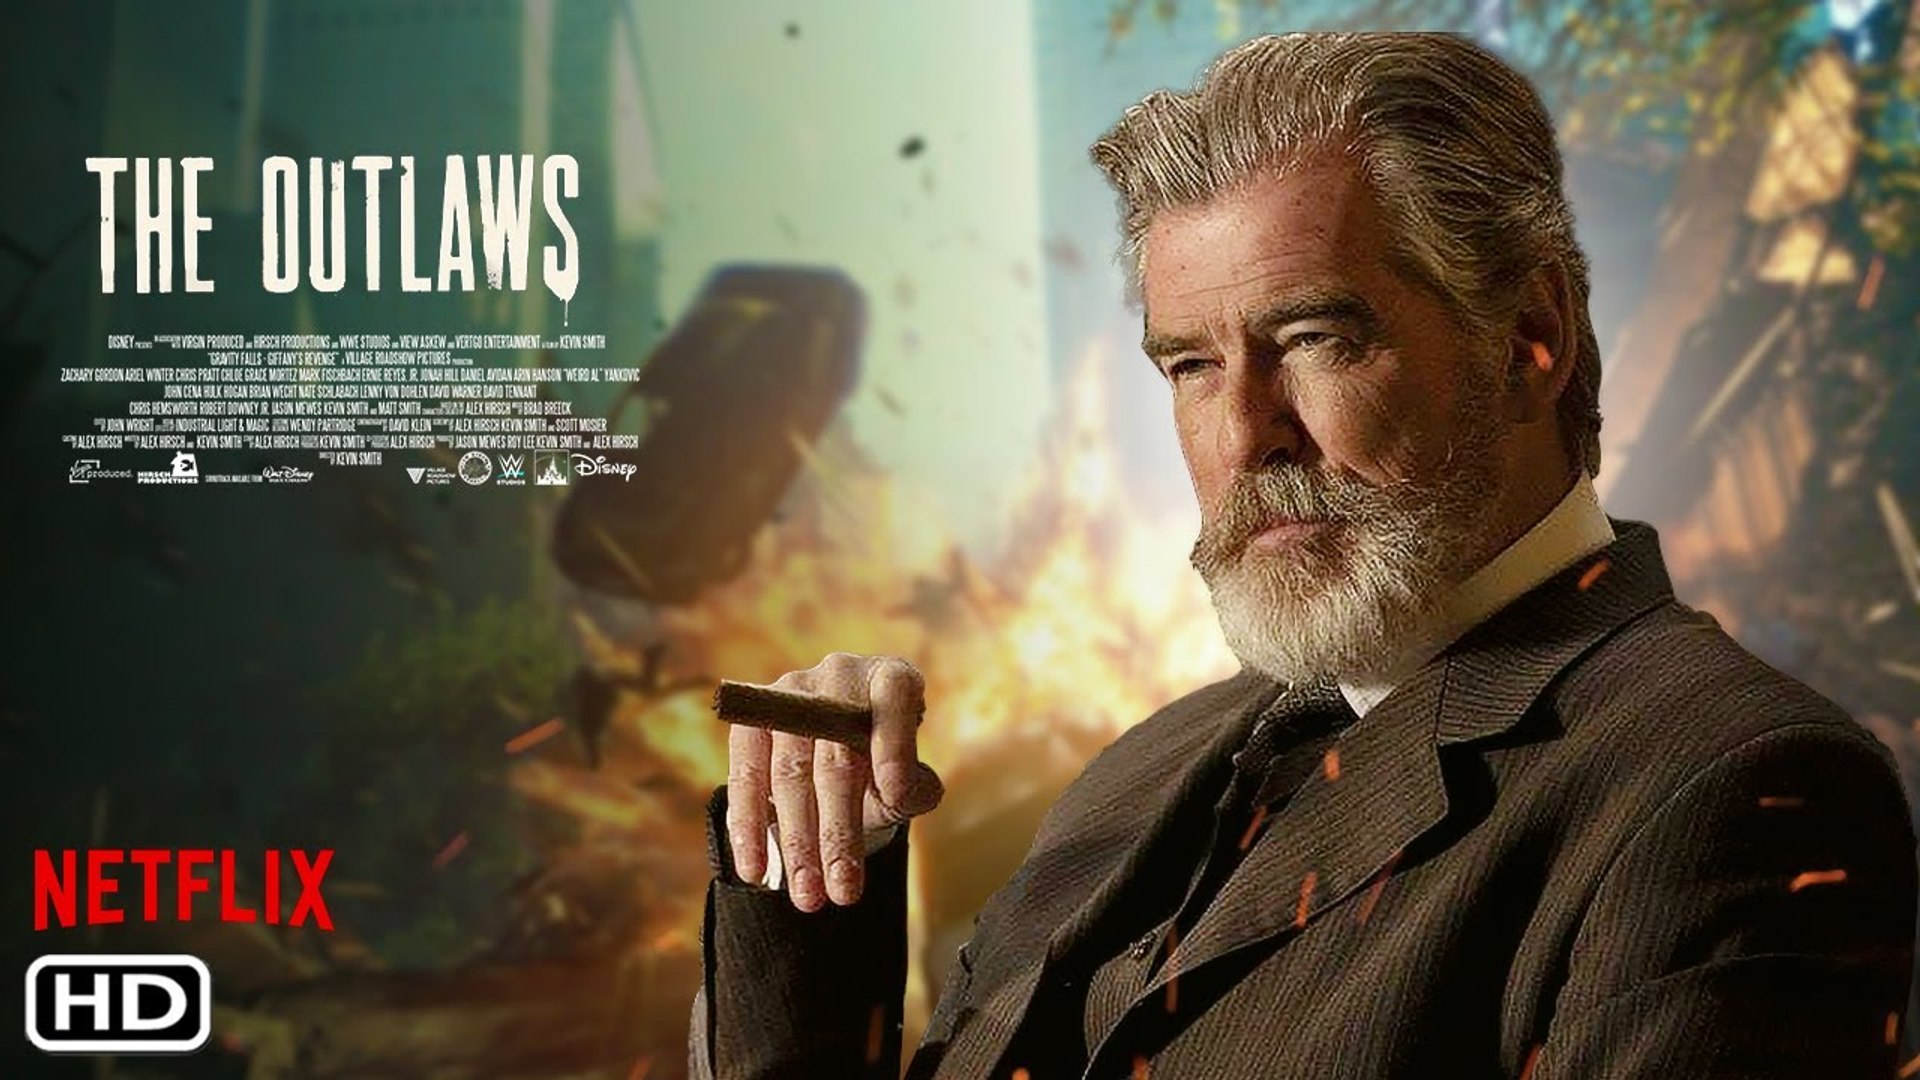 The Out-Laws Netflix Trailer (2022) - Pierce Brosnan, Release Date, Cast,The Out-Laws Movie Teaser - video Dailymotion